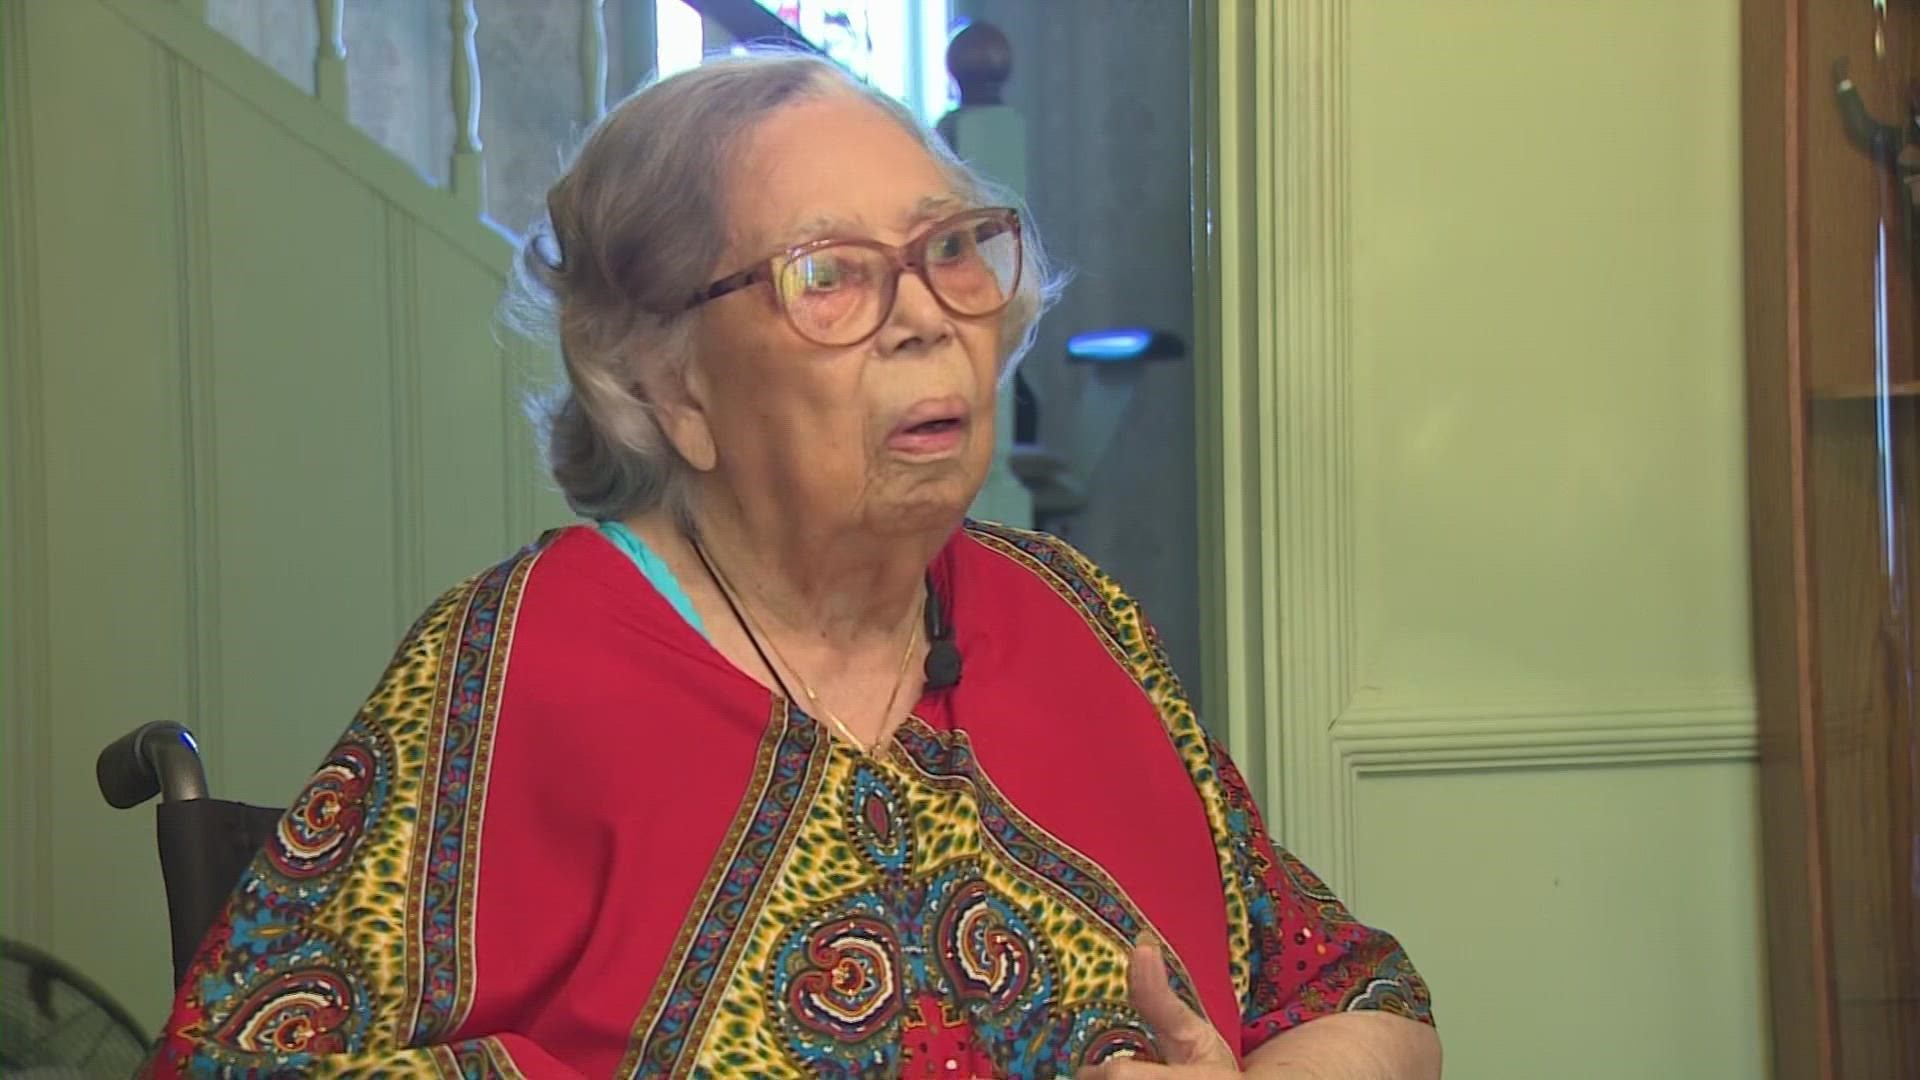 Ruby Poindexter, 93, has been voting since she was 21. But Thursday, she found out her mail ballot application was rejected and she's frustrated.